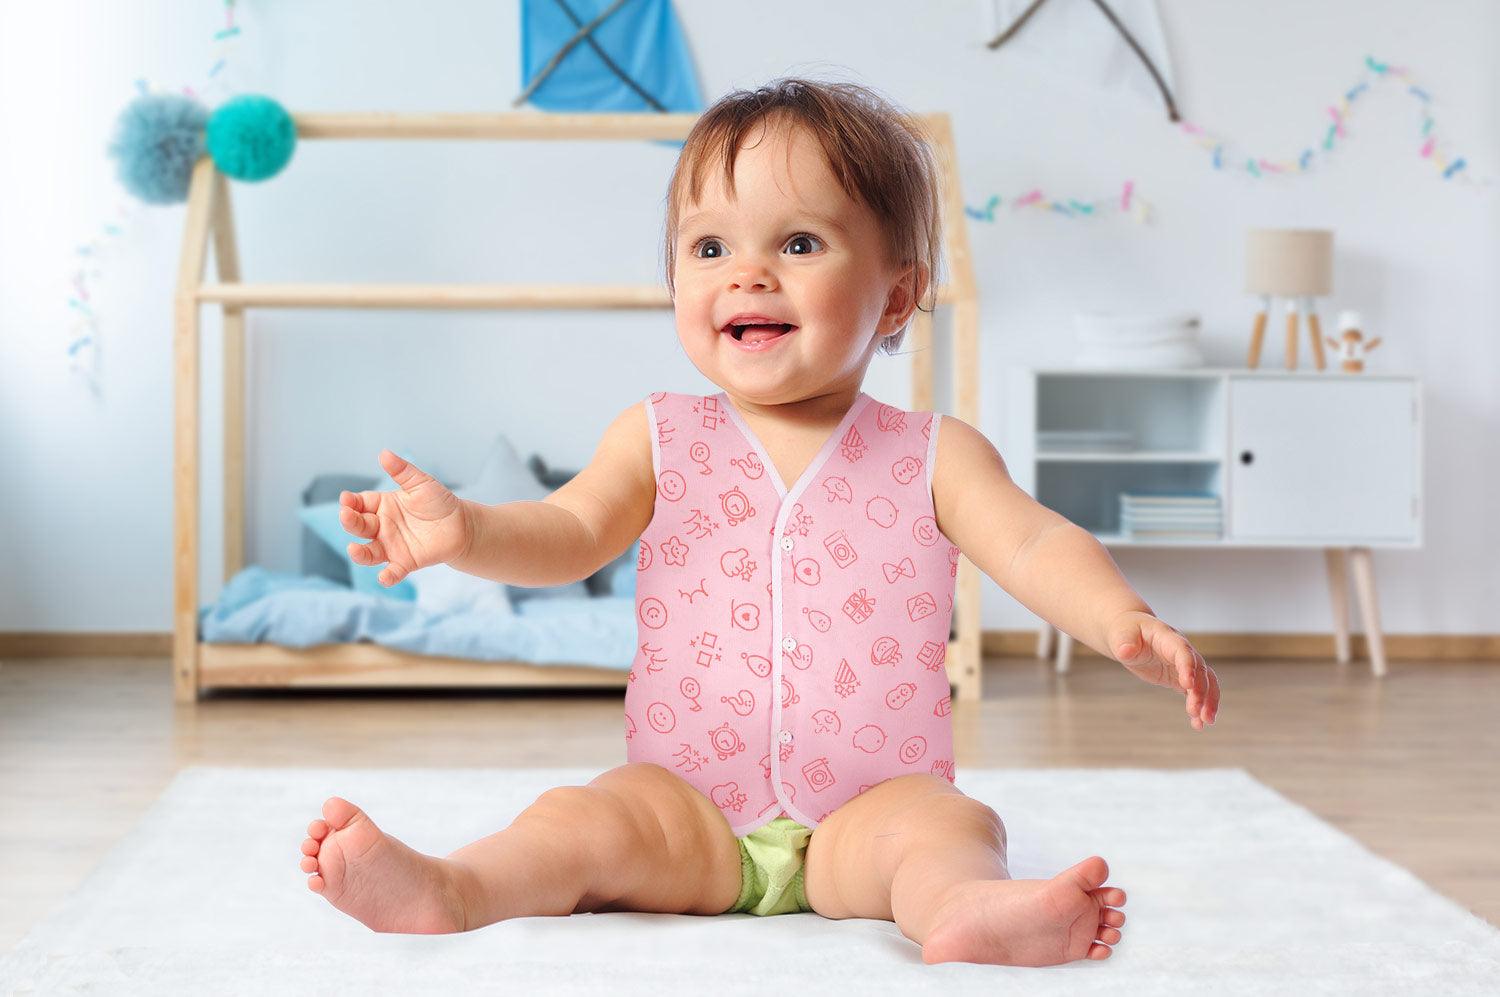 Baby Moo Jhablas are the ideal baby clothing for 3 reasons.